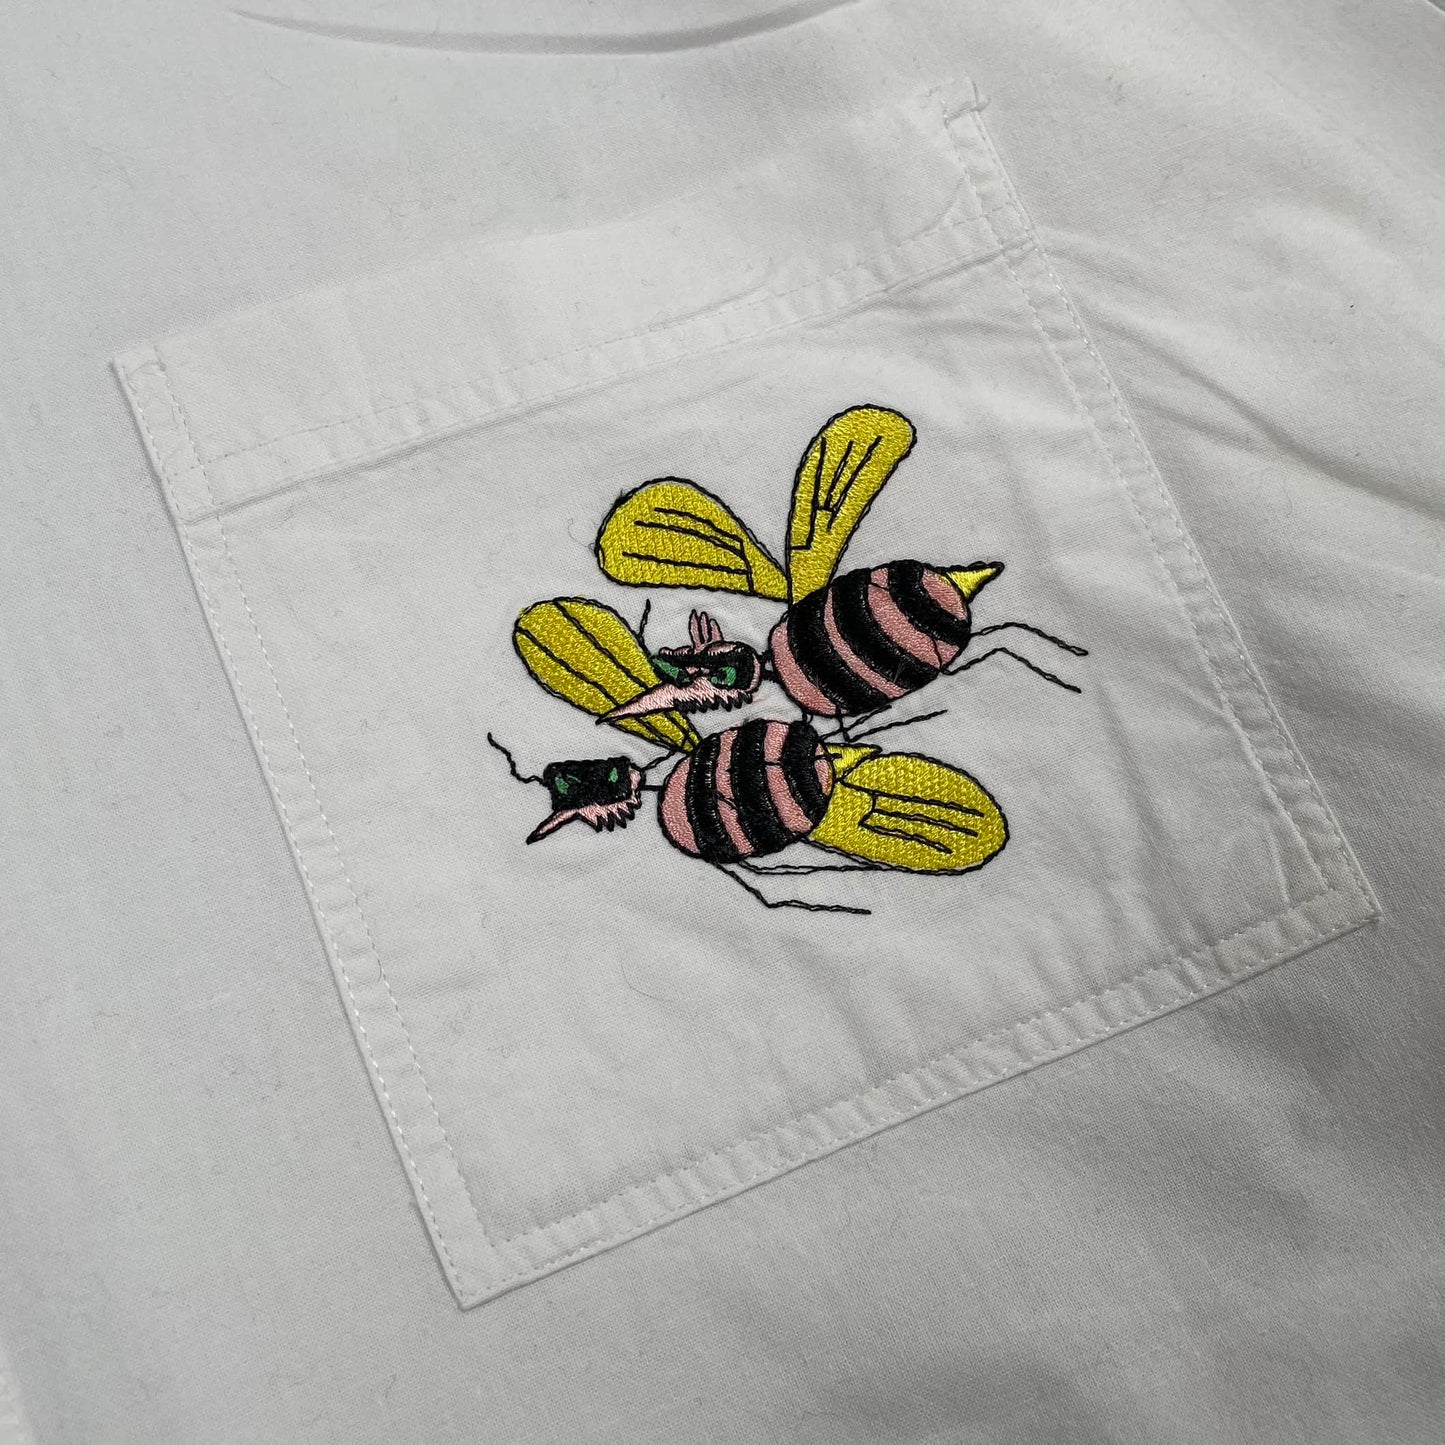 White Vintage Shirt Embroidery